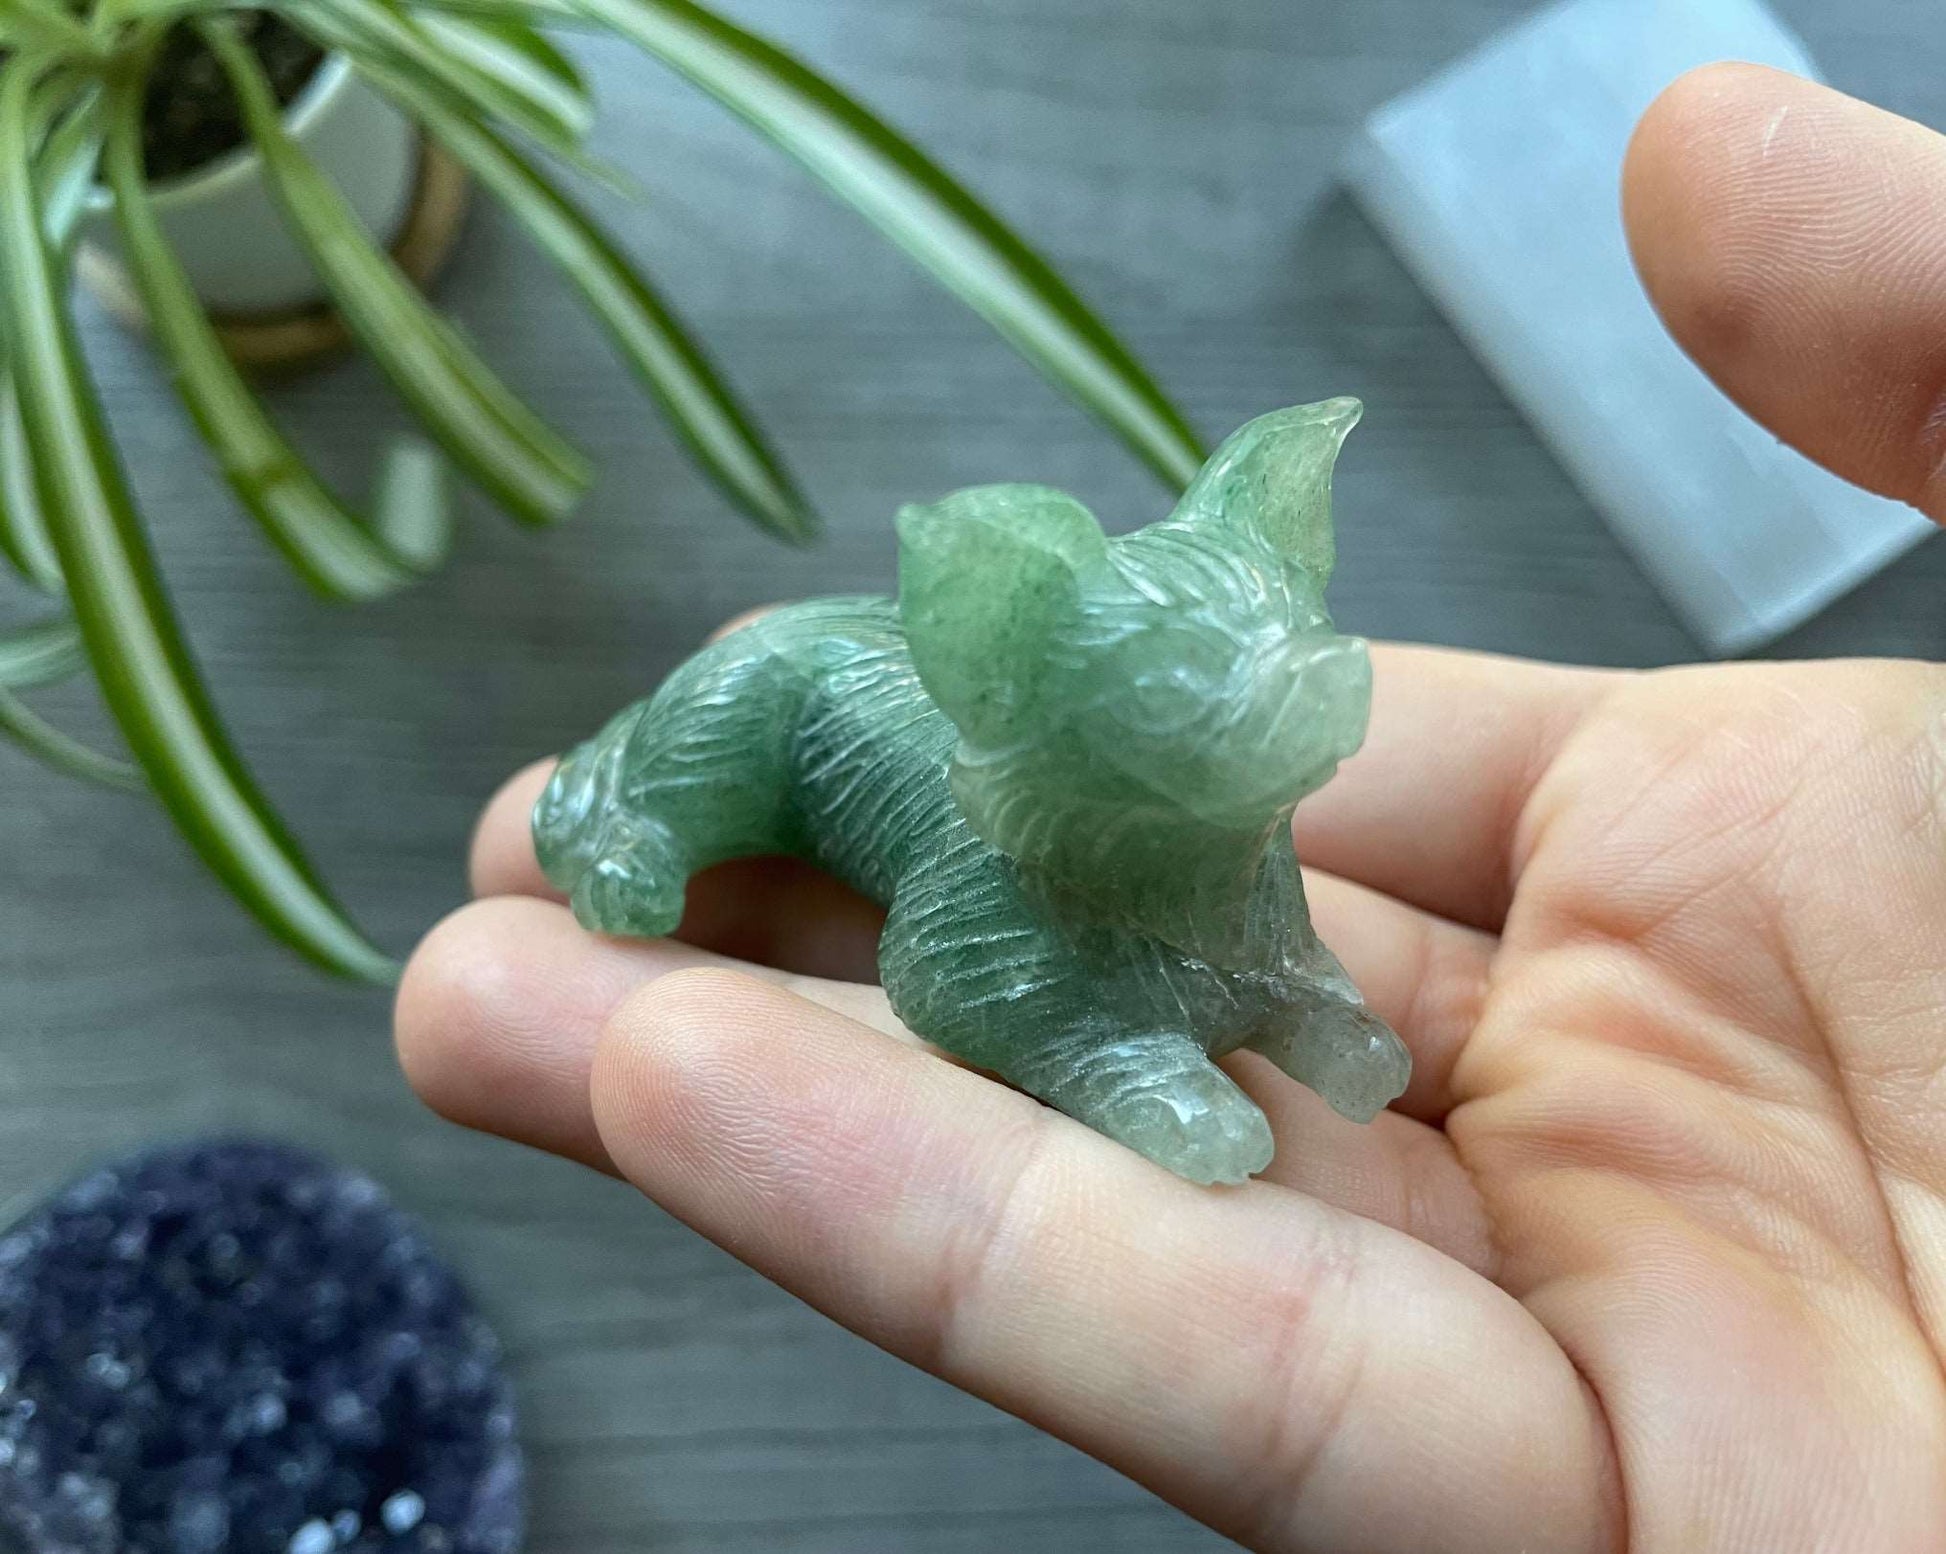 Pictured is a green aventurine dog carving.